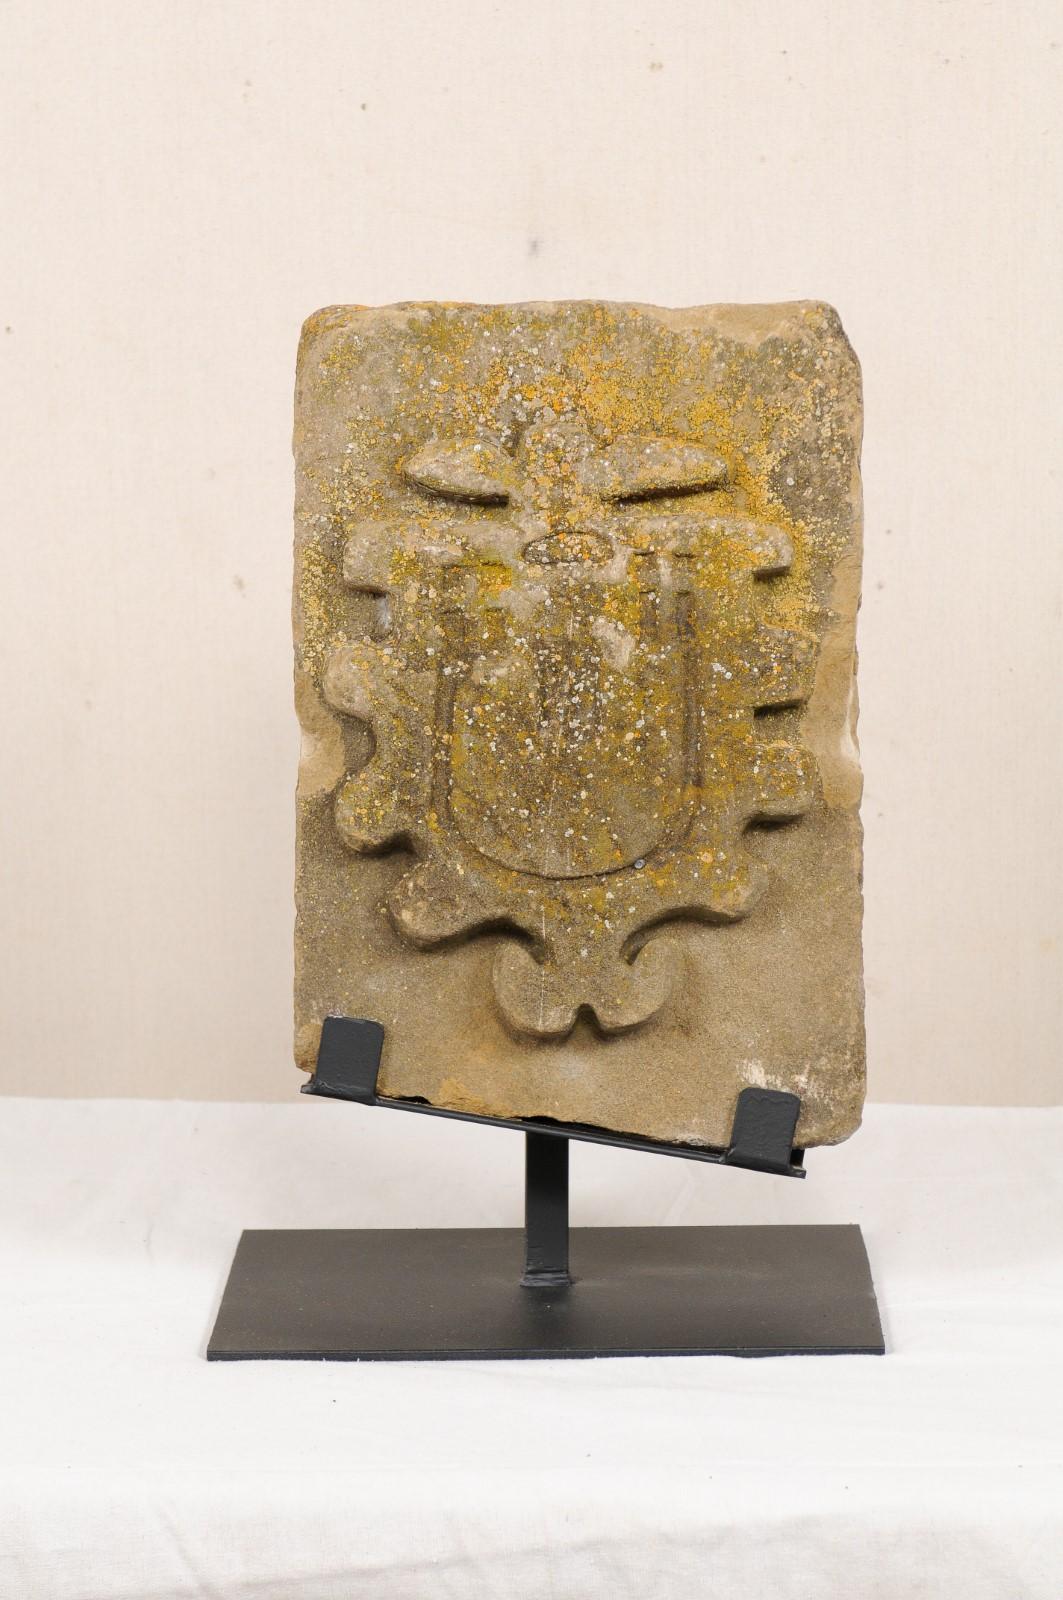 An 18th to 19th century carved stone architectural fragment from Aragon, Spain. This antique architectural fragment from Aragon has been hand-carved of stone, featuring a raised shield-shaped design with curvy outline about it's perimeter, and is